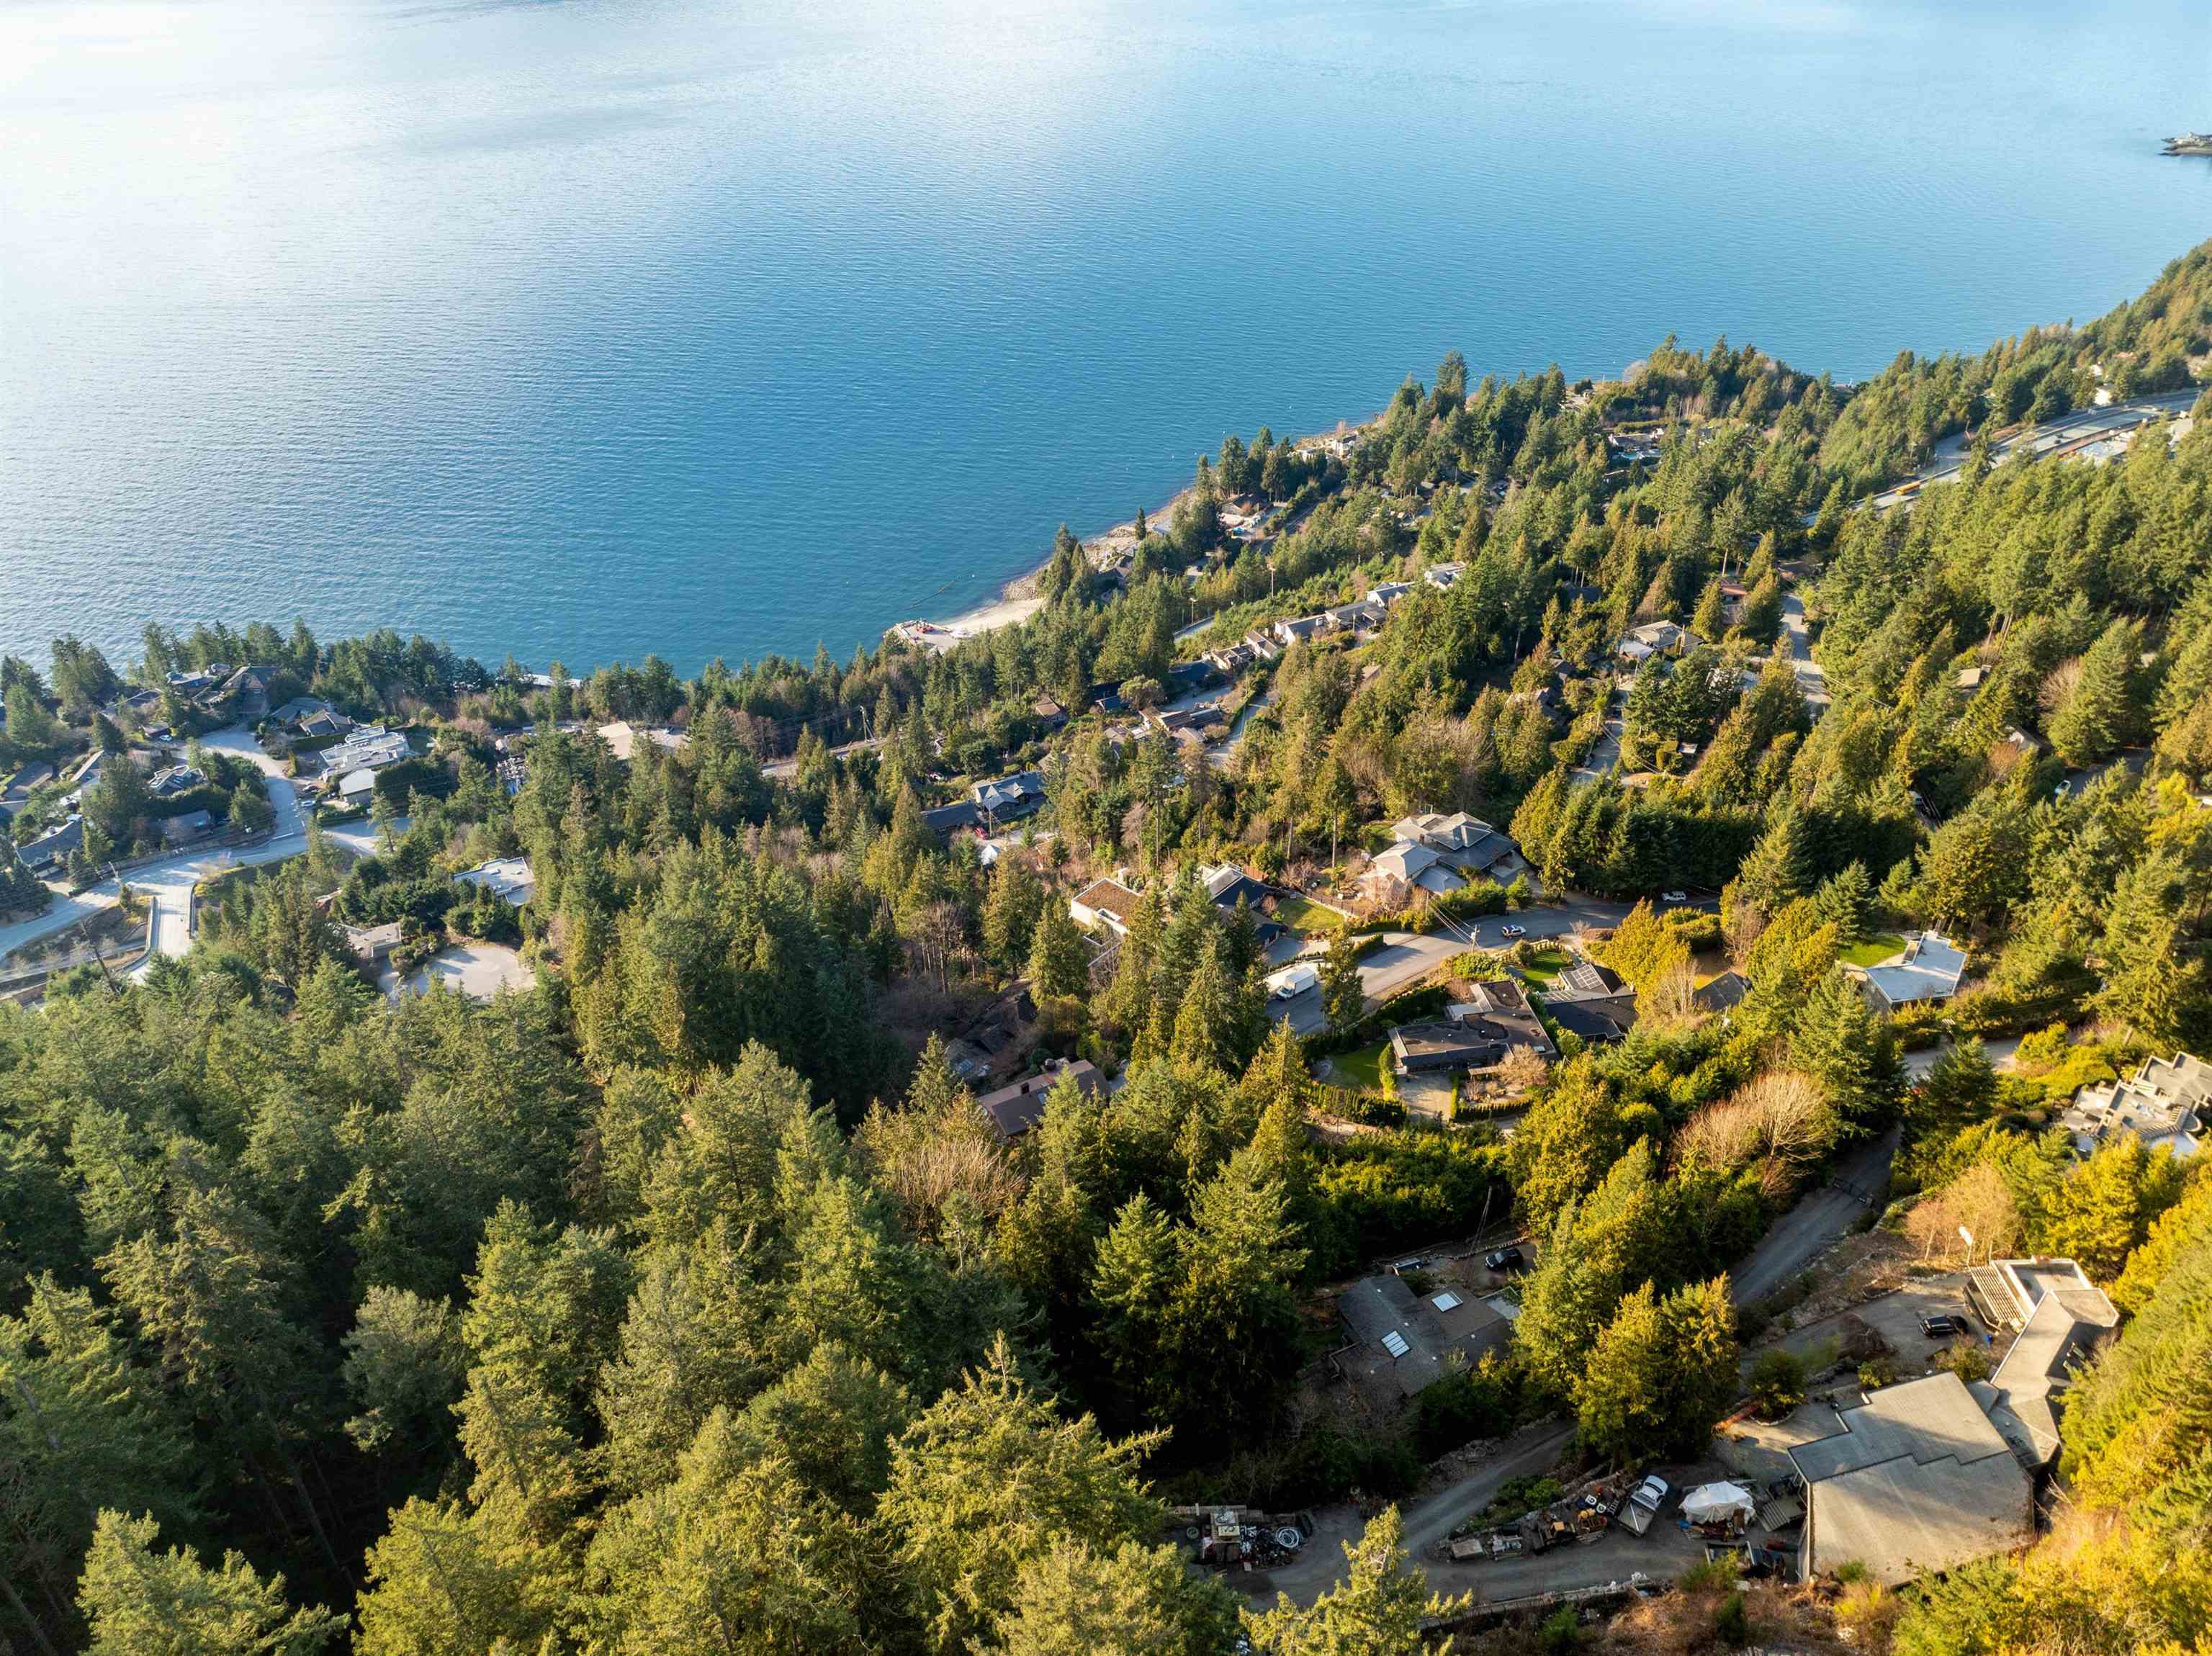 Listing image of 280 OCEANVIEW ROAD